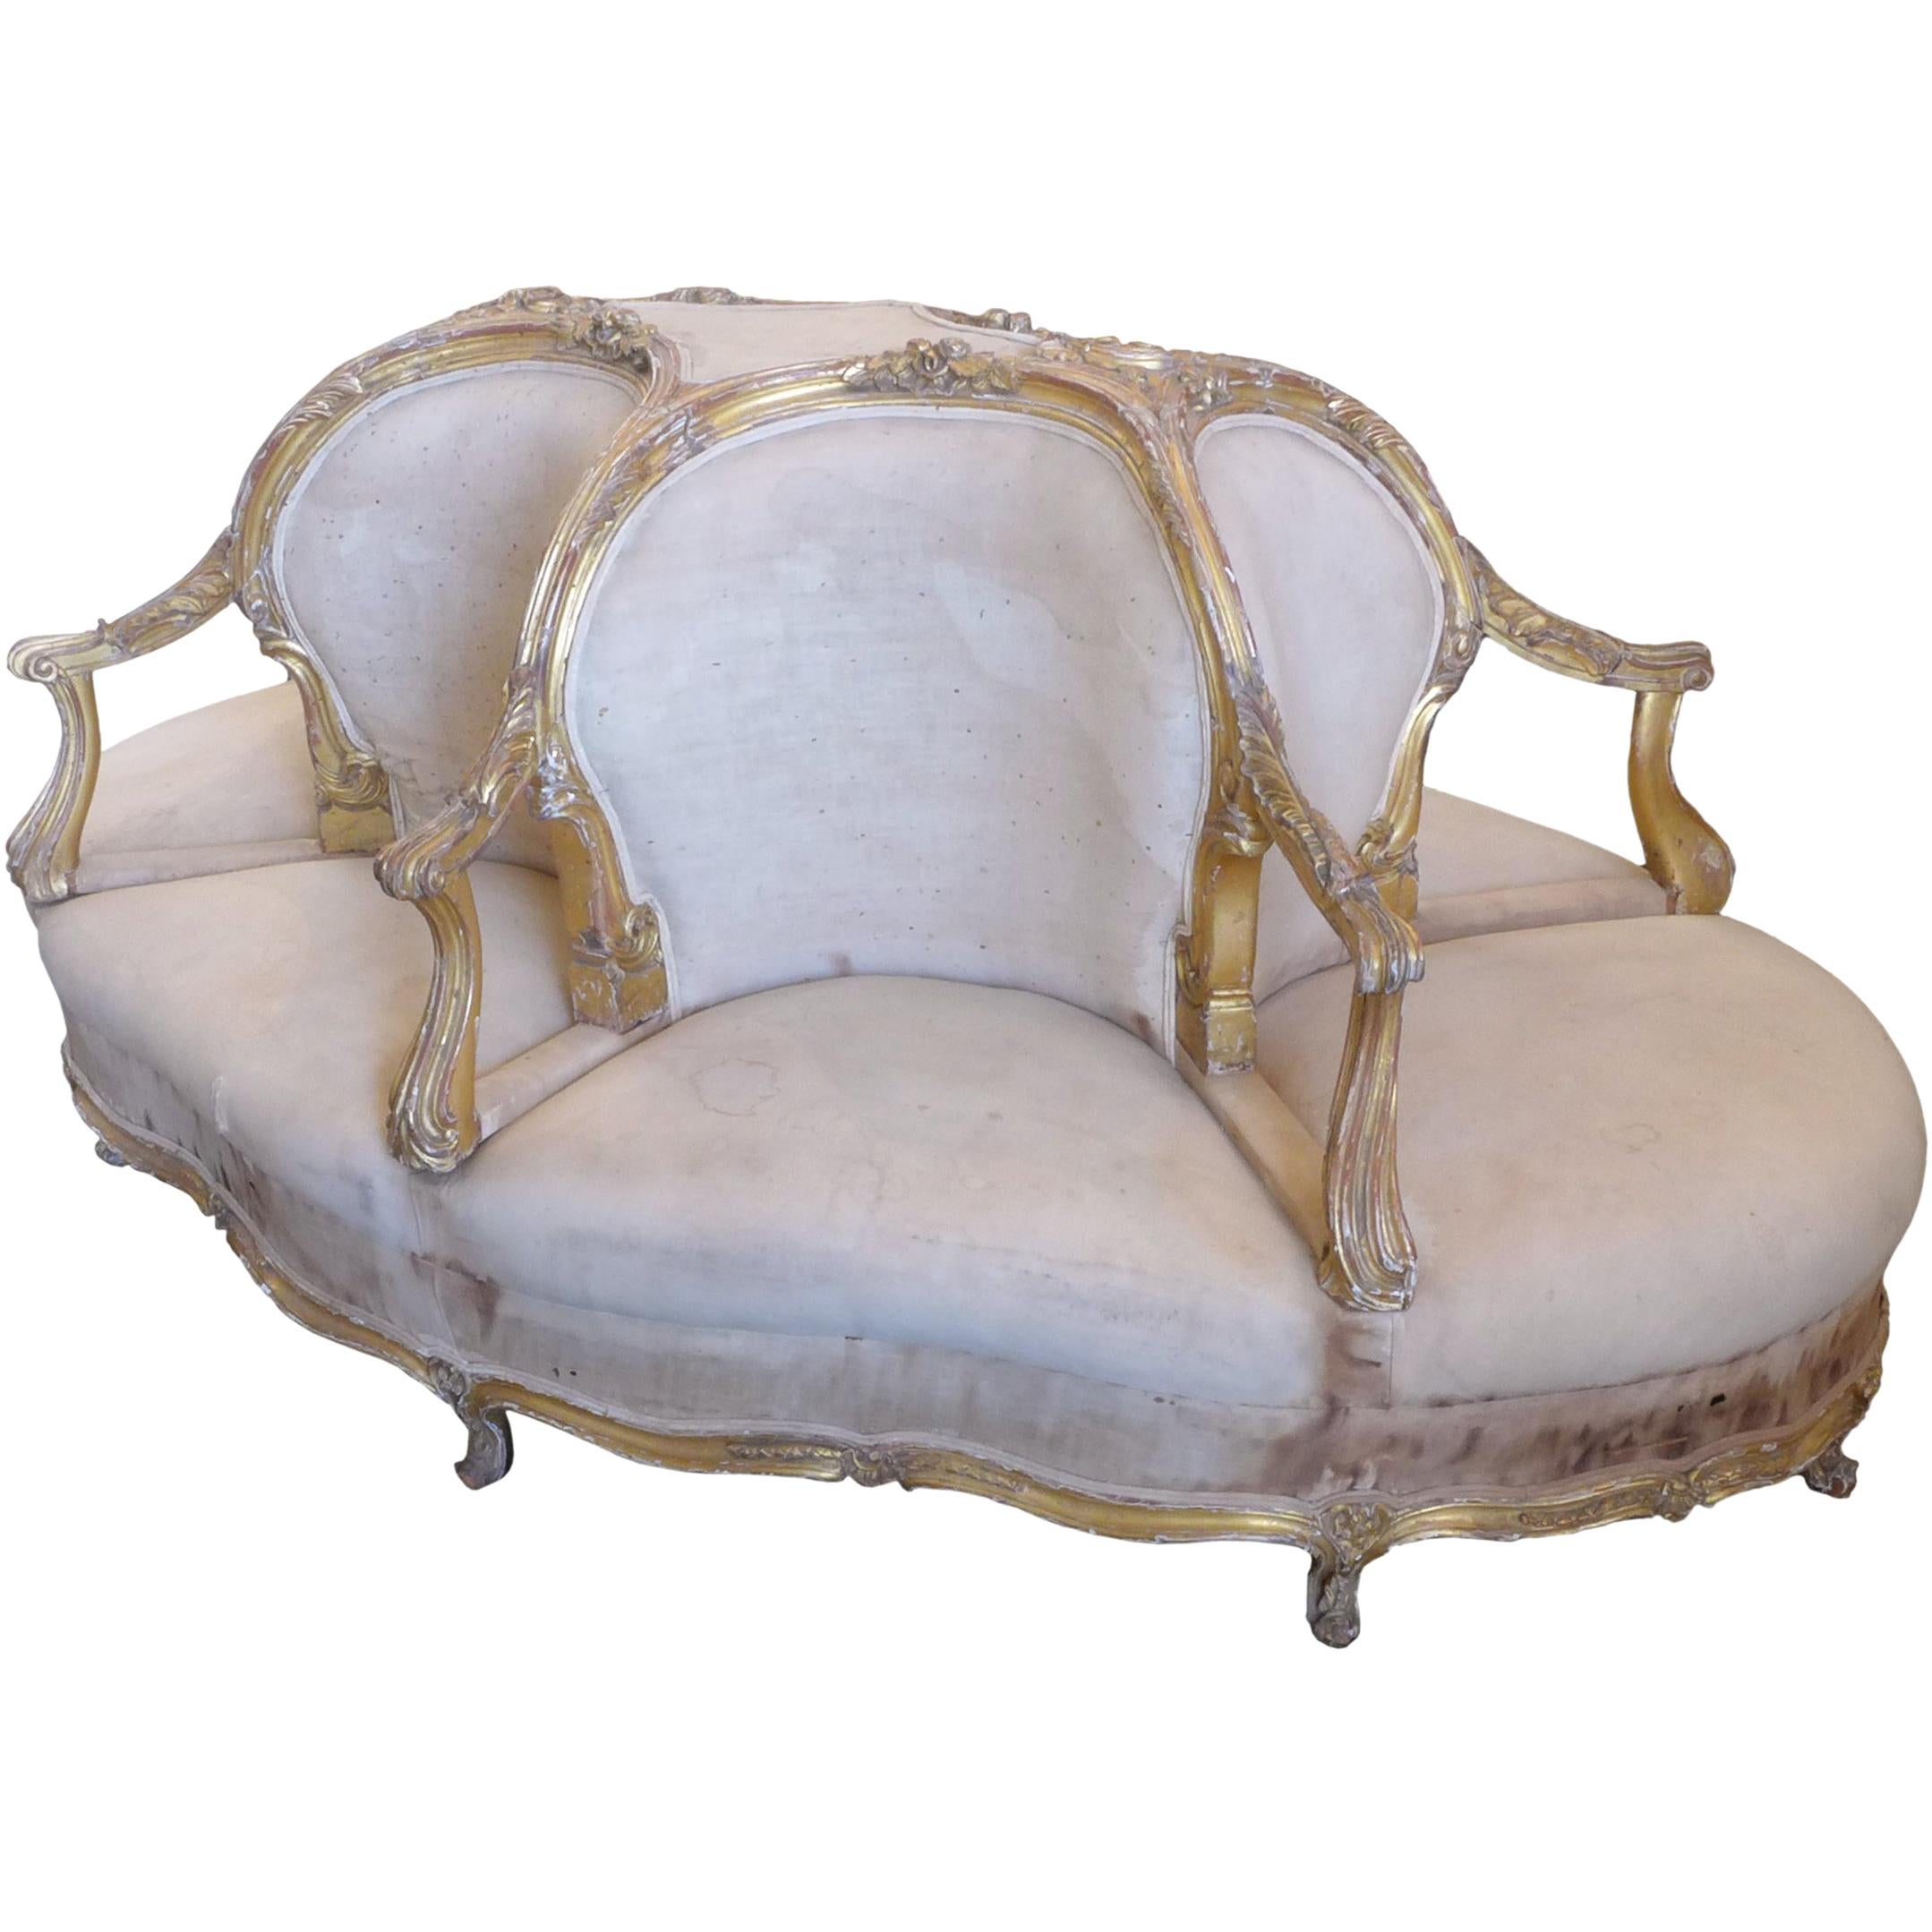 Six-Seat 19th Century French Conversation Seat For Sale